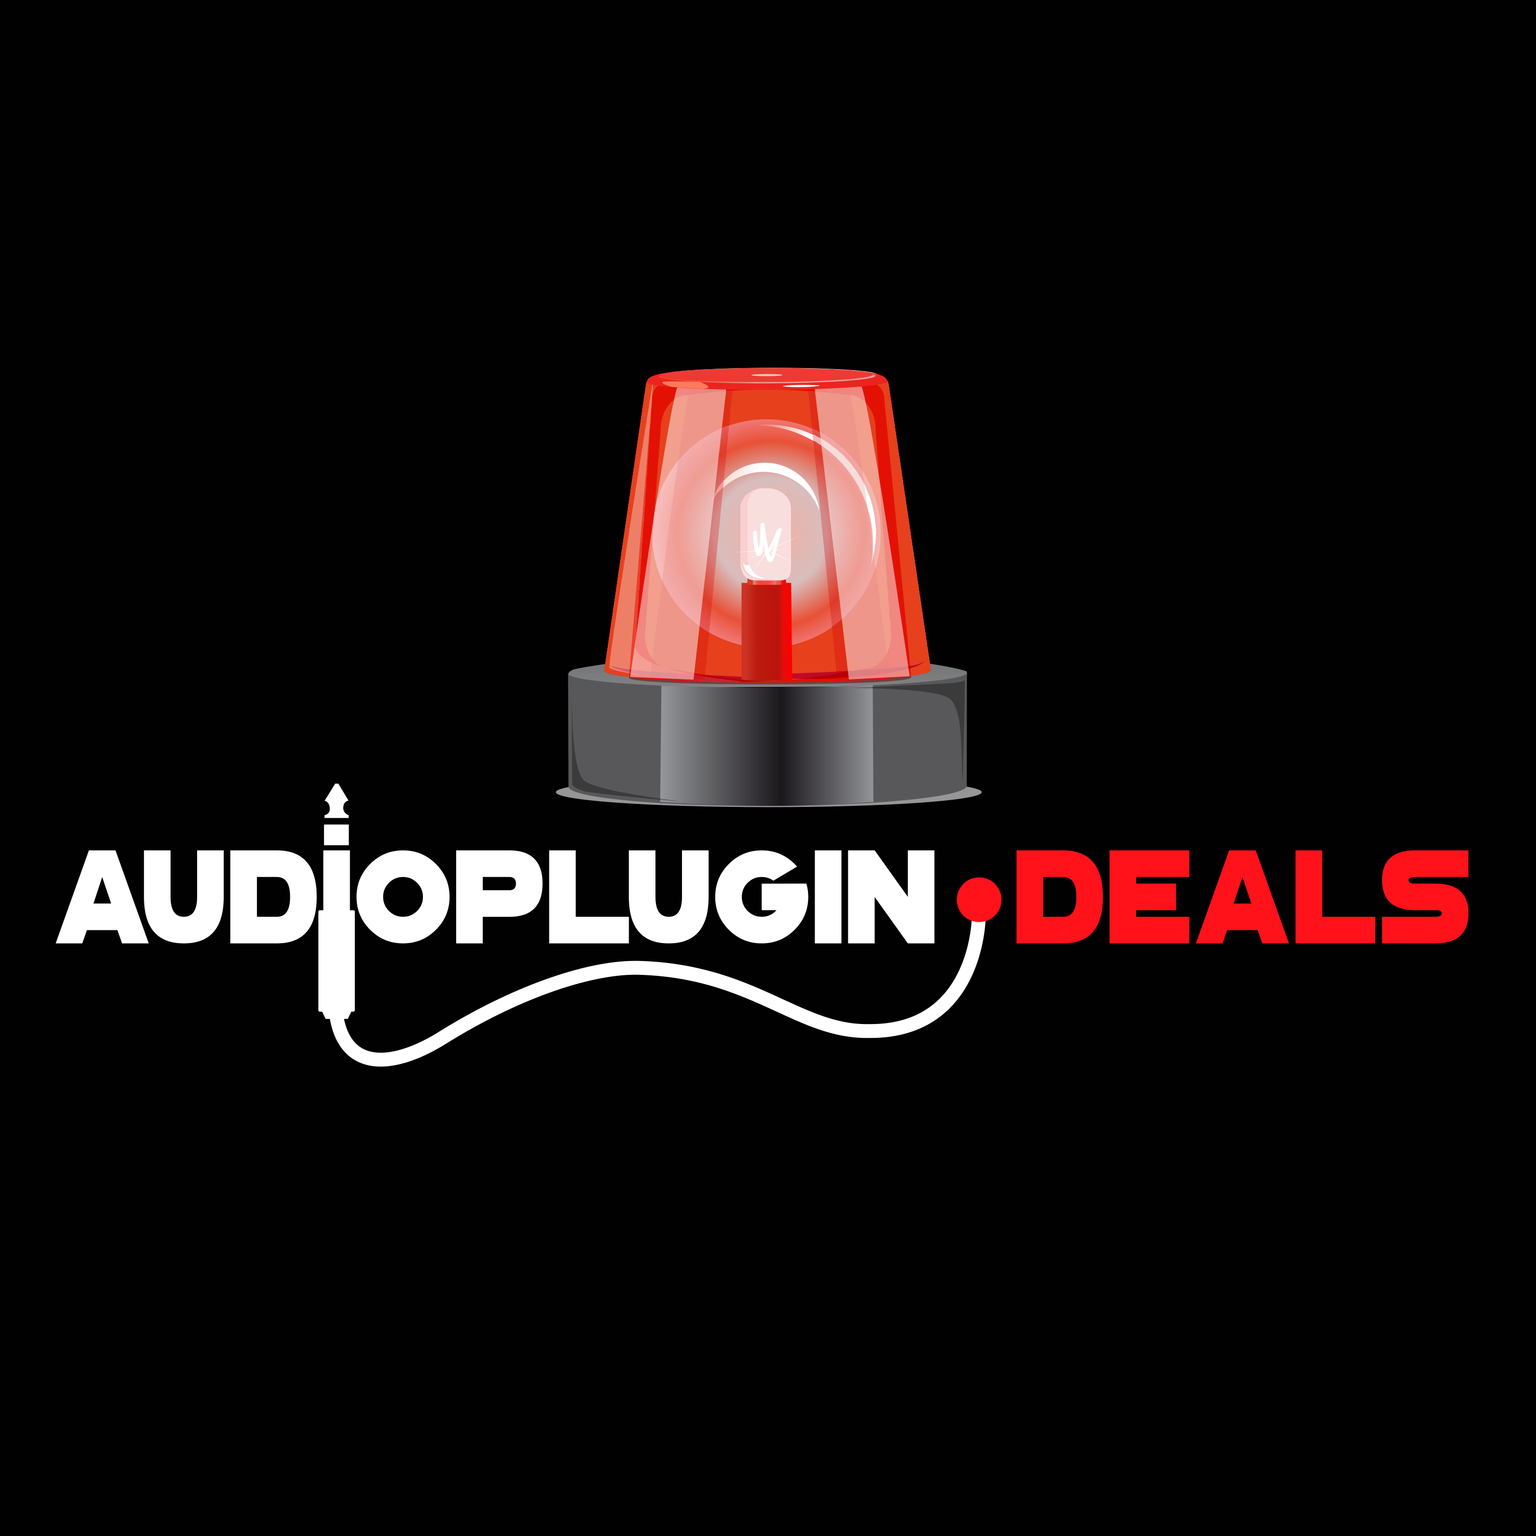 Brian is an official vlogger and writer for the popular website Audio Plugin Deals.